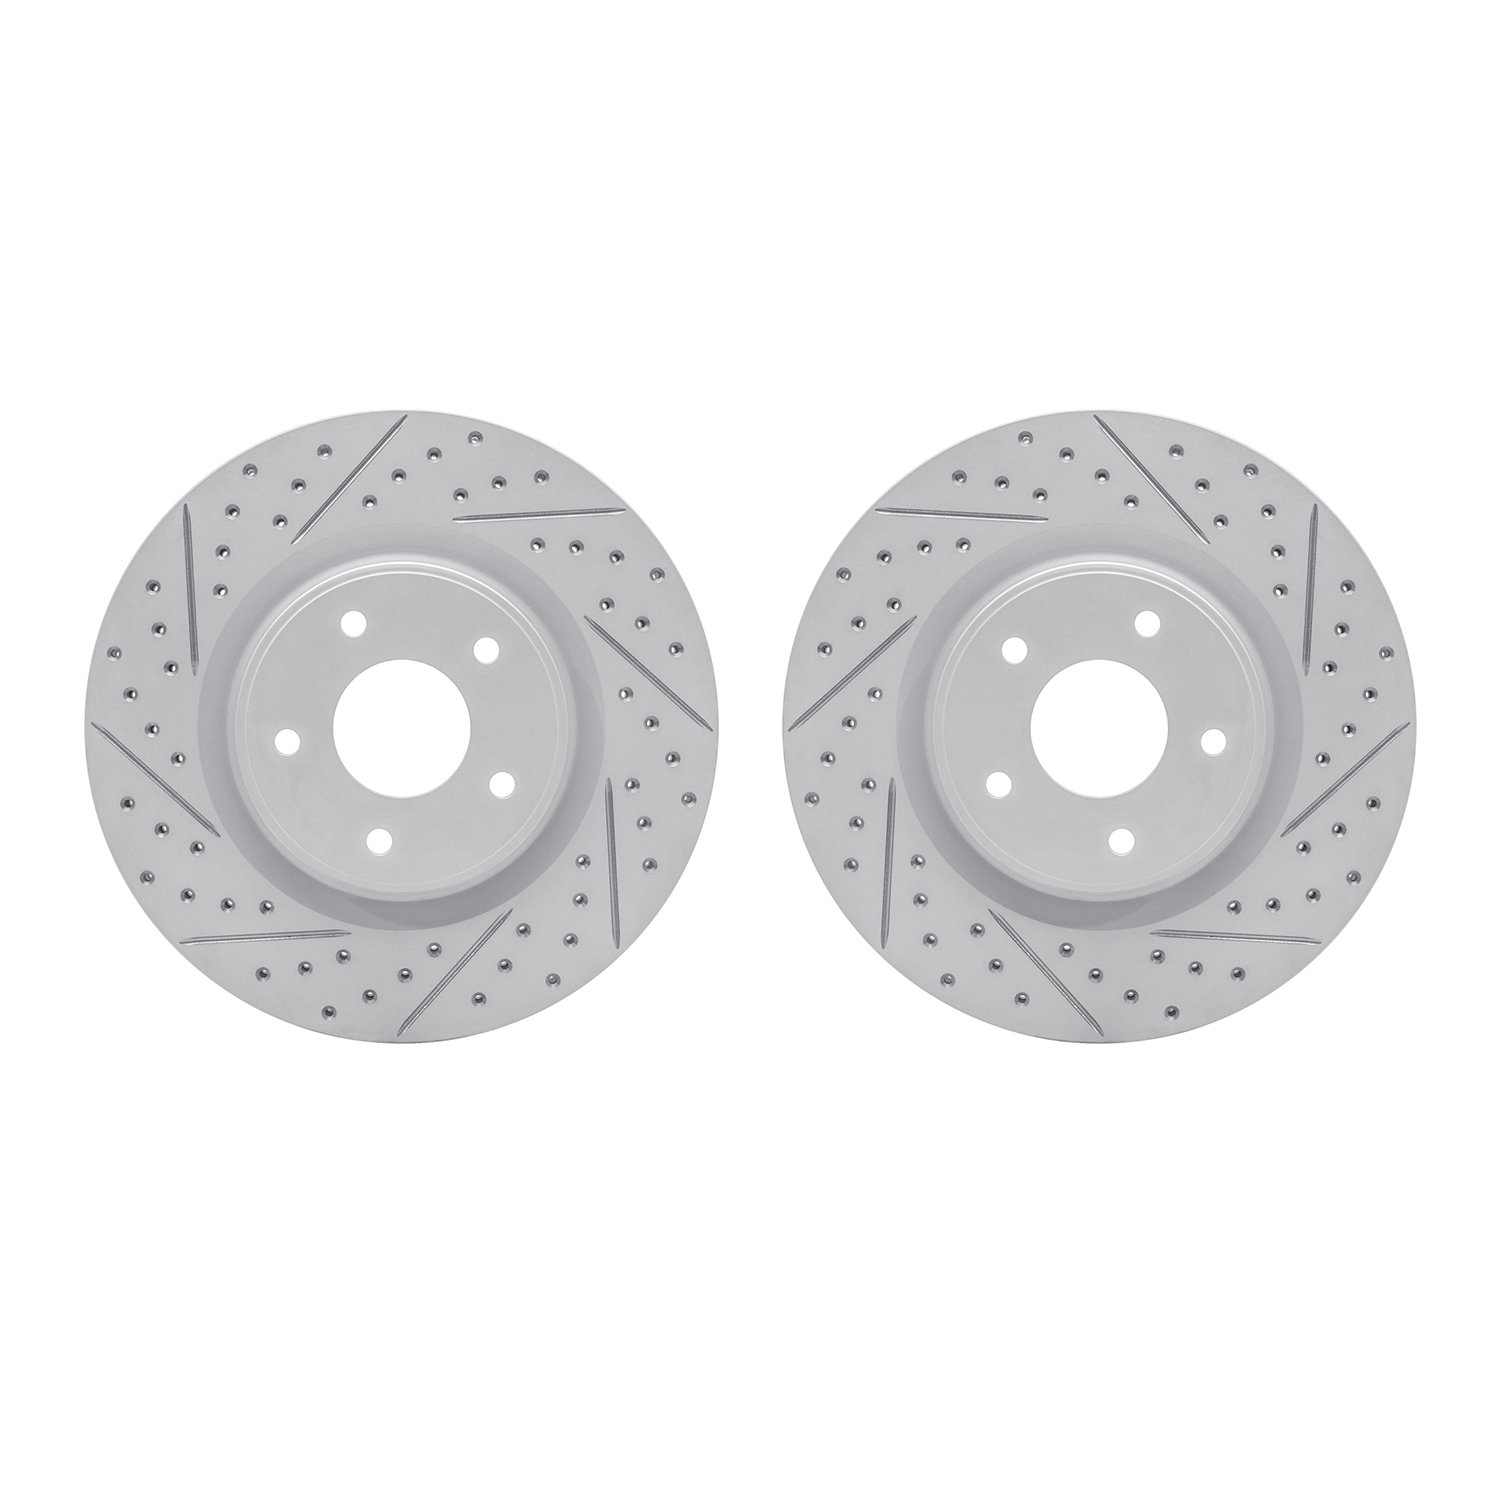 2002-67007 Geoperformance Drilled/Slotted Brake Rotors, Fits Select Infiniti/Nissan, Position: Front